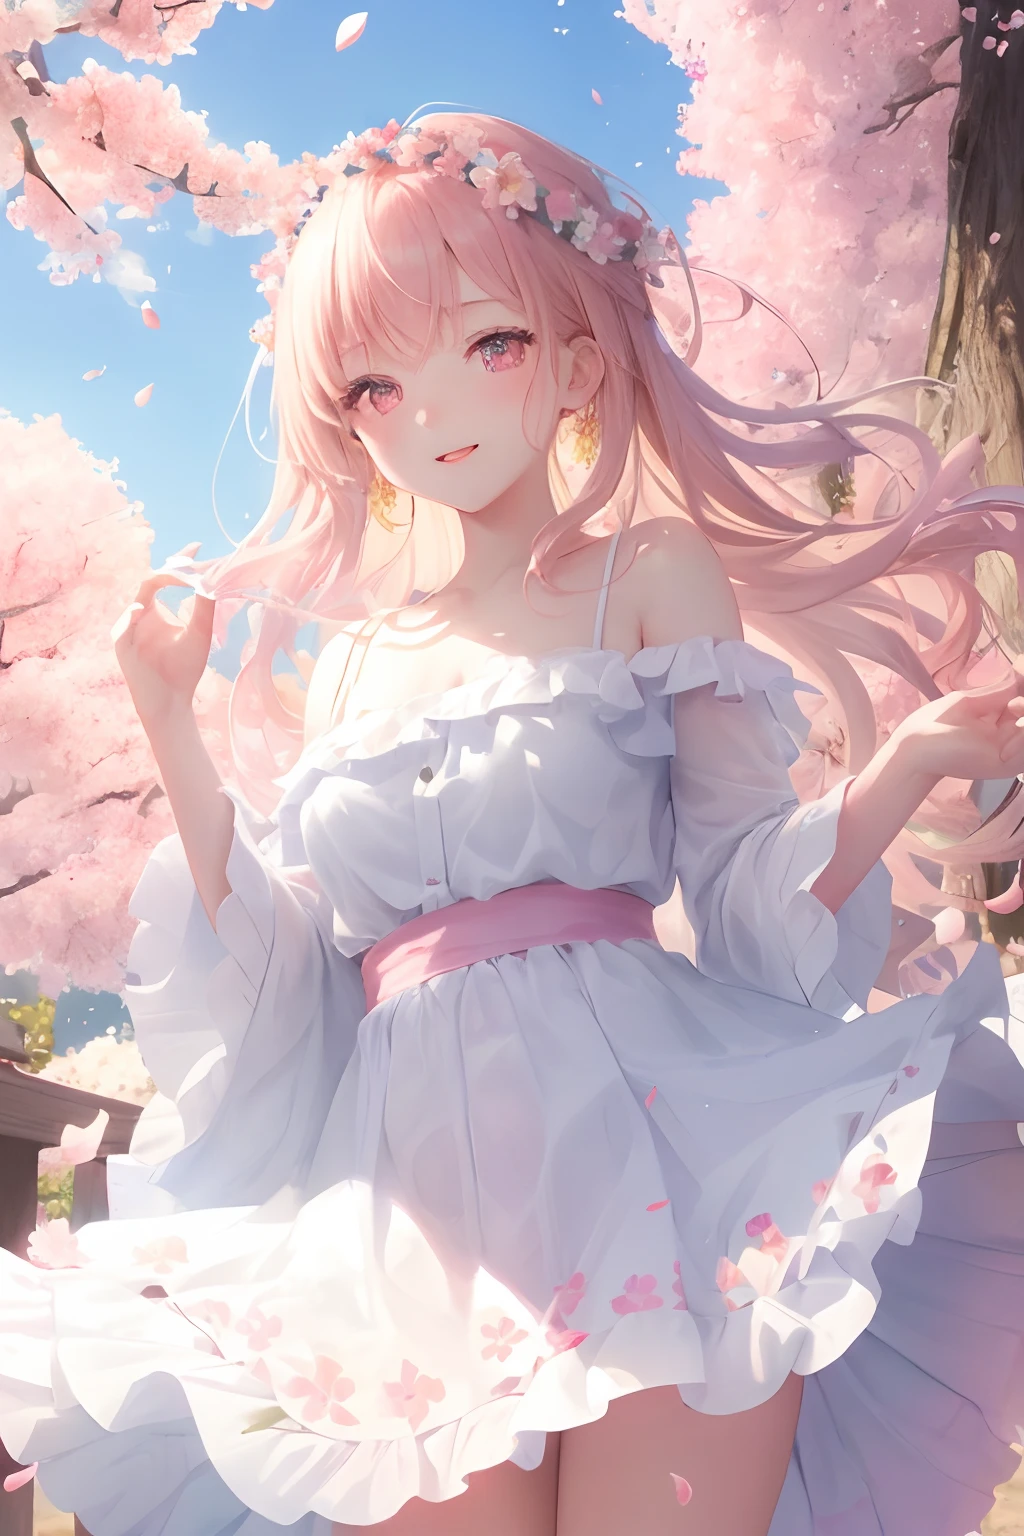 art by Cornflower, dreamy
cherry_blossoms, falling_petals, petals, branch, pink_flower, 1girl,20-year-old, blue_sky, spring_\(season\), petals_on_liquid, flower, hanami, dress, (Long blond curly hair：1.5),Wearing a wreath,sky, outdoors, cloud, bangs, smile, pink_eyes, White skirt with cherry blossom embellishments, bare_shoulders, earrings, holding_flower, wind, tree, looking_at_viewer,cowboy shot,